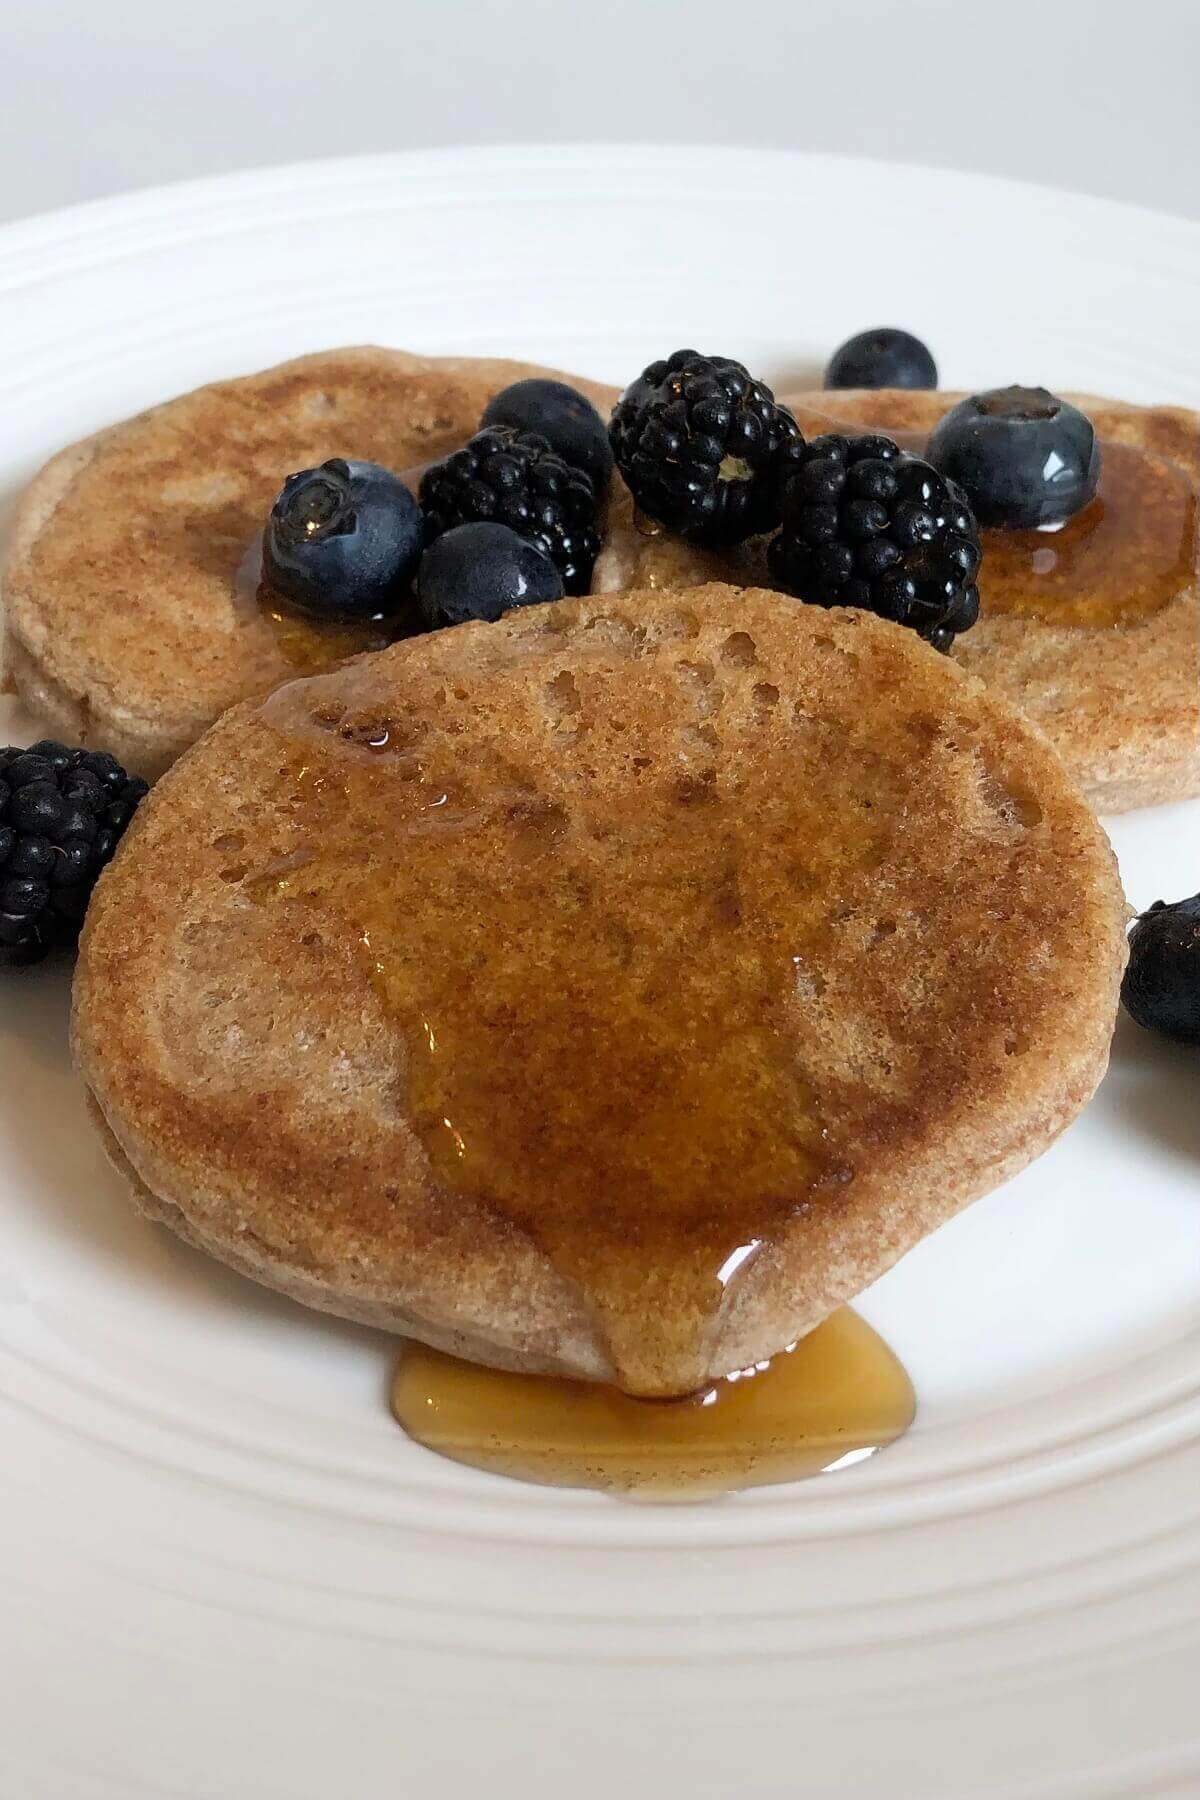 Pancakes with berries and maple syrup dripping off.